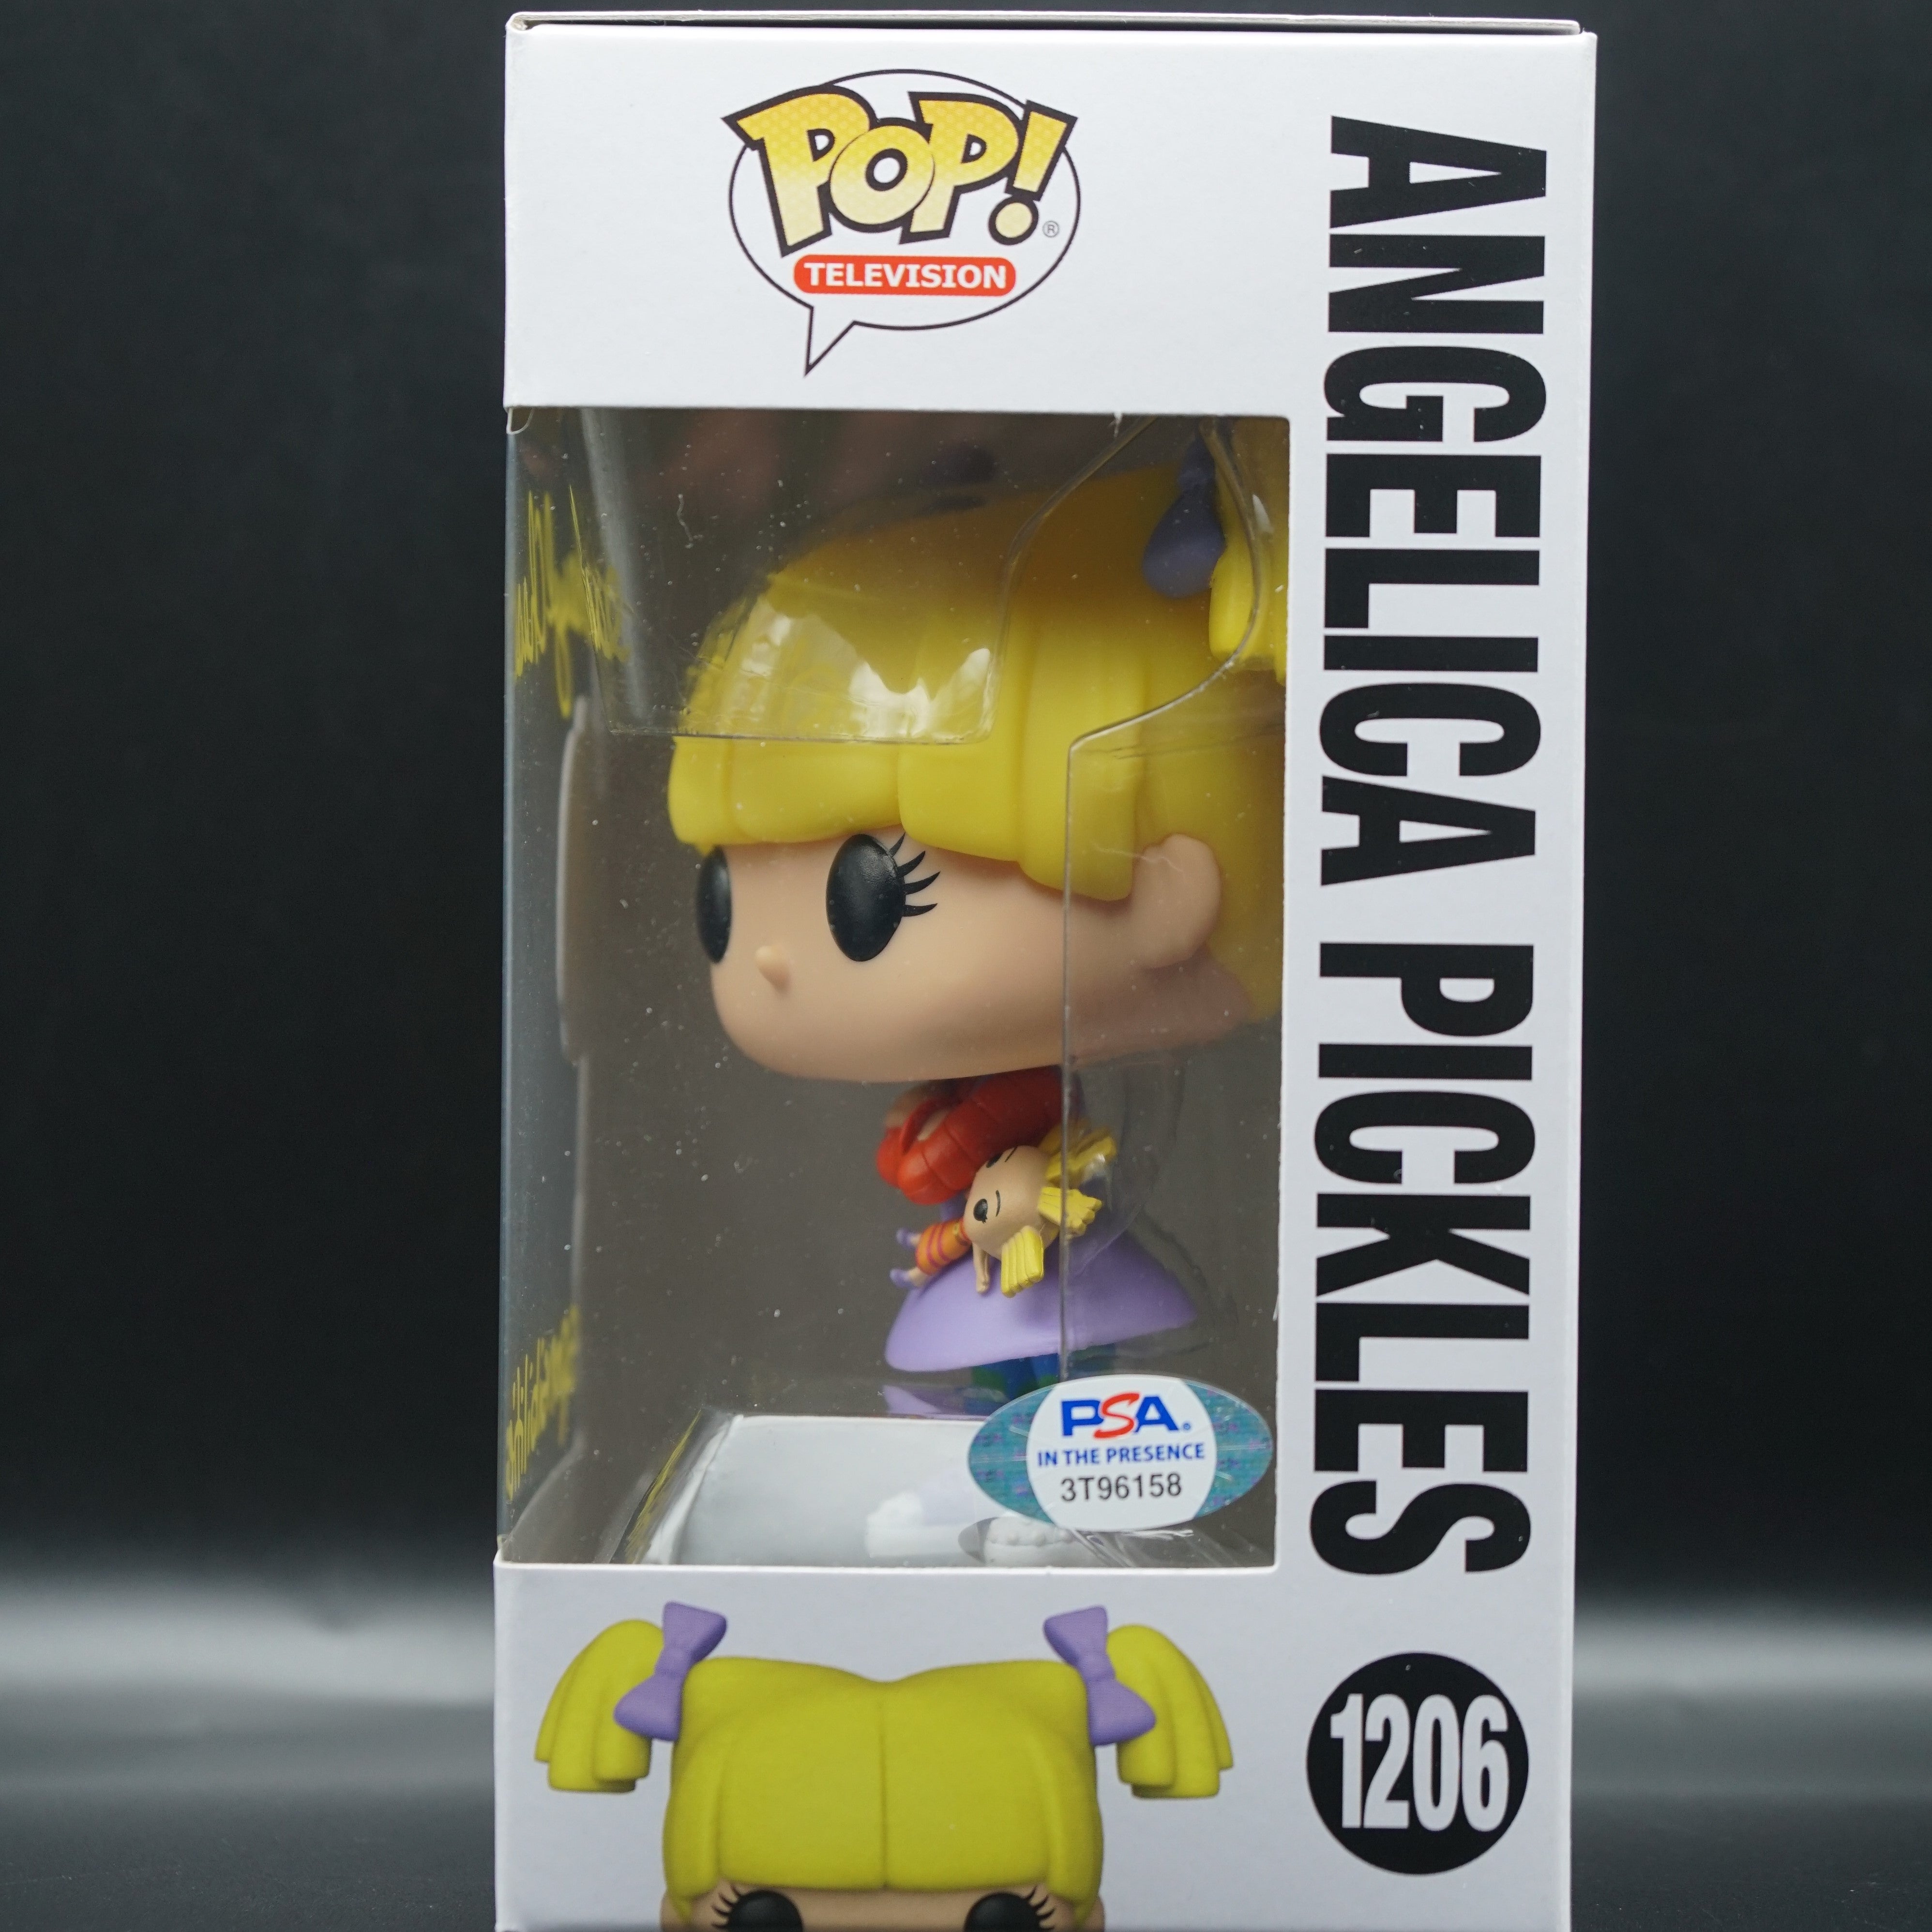 Rugrats Funko Pop #1206 Angelica Pickles from Nickelodeon Cartoon PSA COA with inscription "You Dumb Babies" - Signed by Cheryl Chase